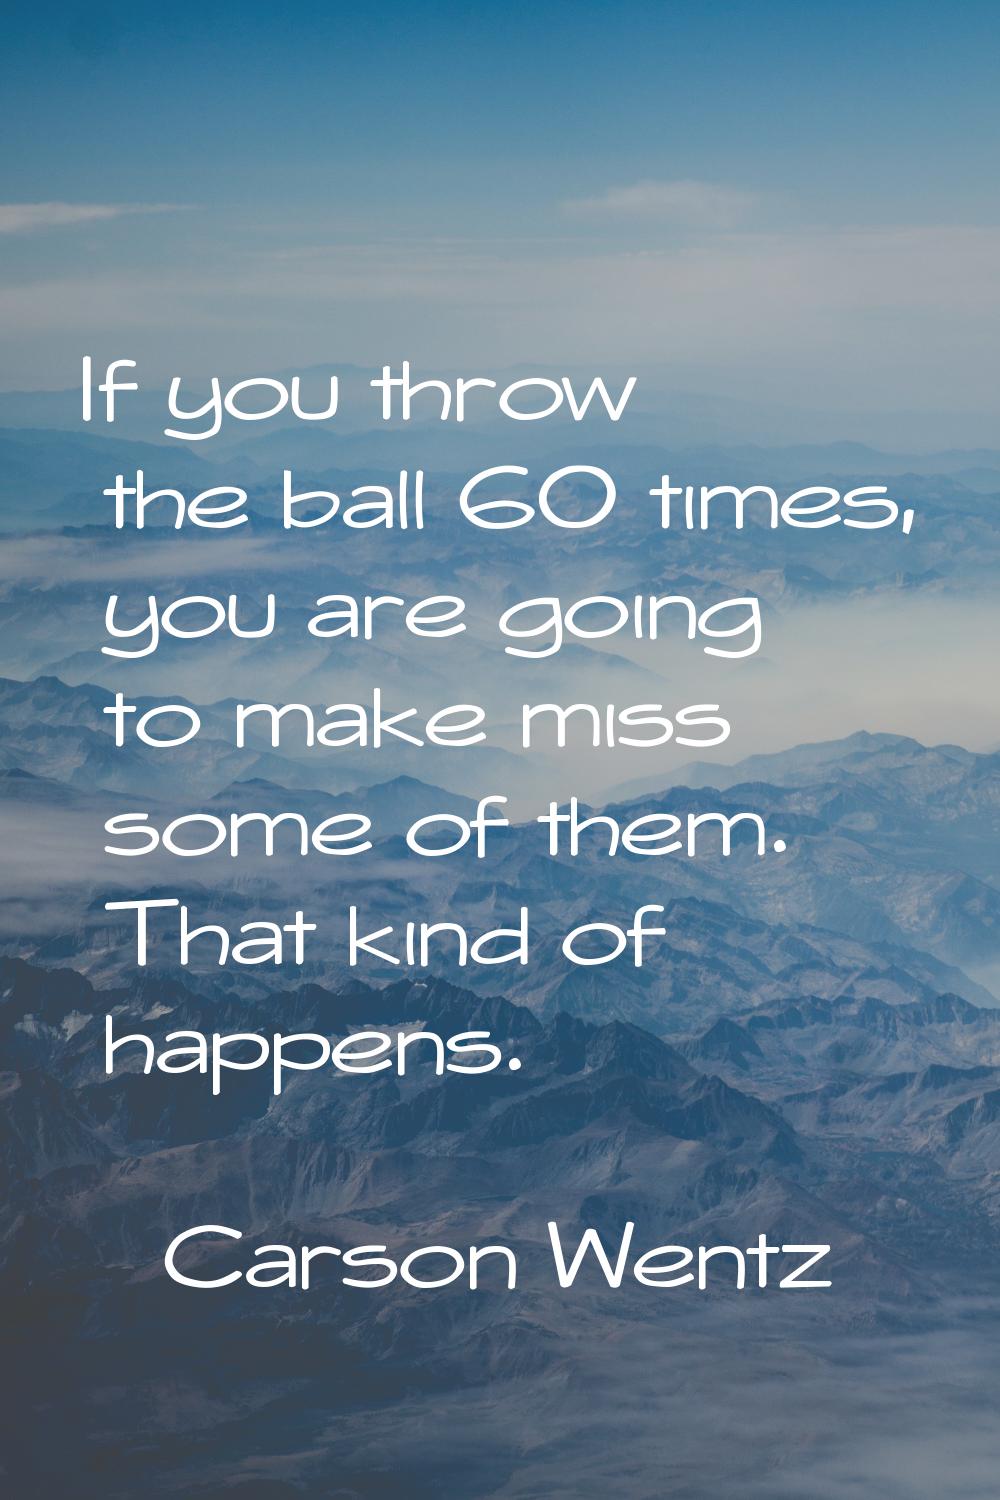 If you throw the ball 60 times, you are going to make miss some of them. That kind of happens.